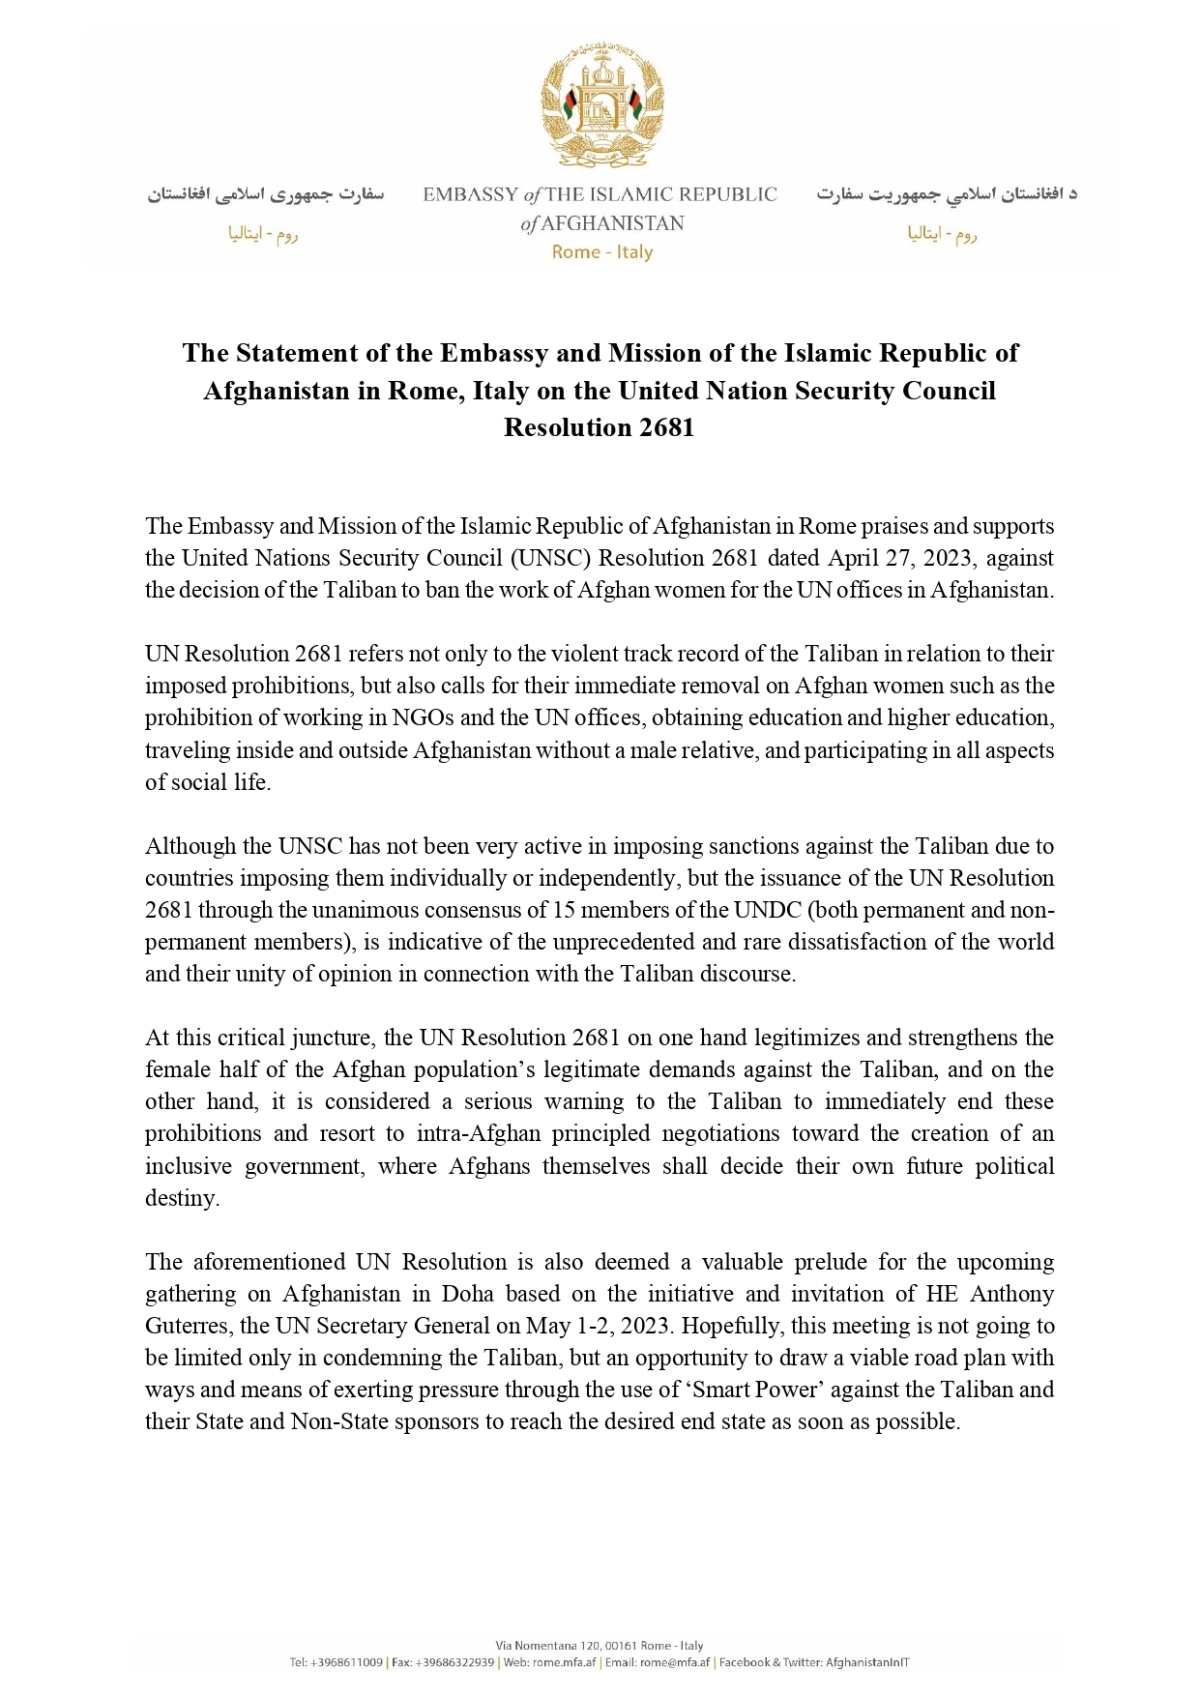 The Statement of the Embassy and Mission of the Islamic Republic of Afghanistan in Rome, Italy on the United Nation Security Council  Resolution 2681